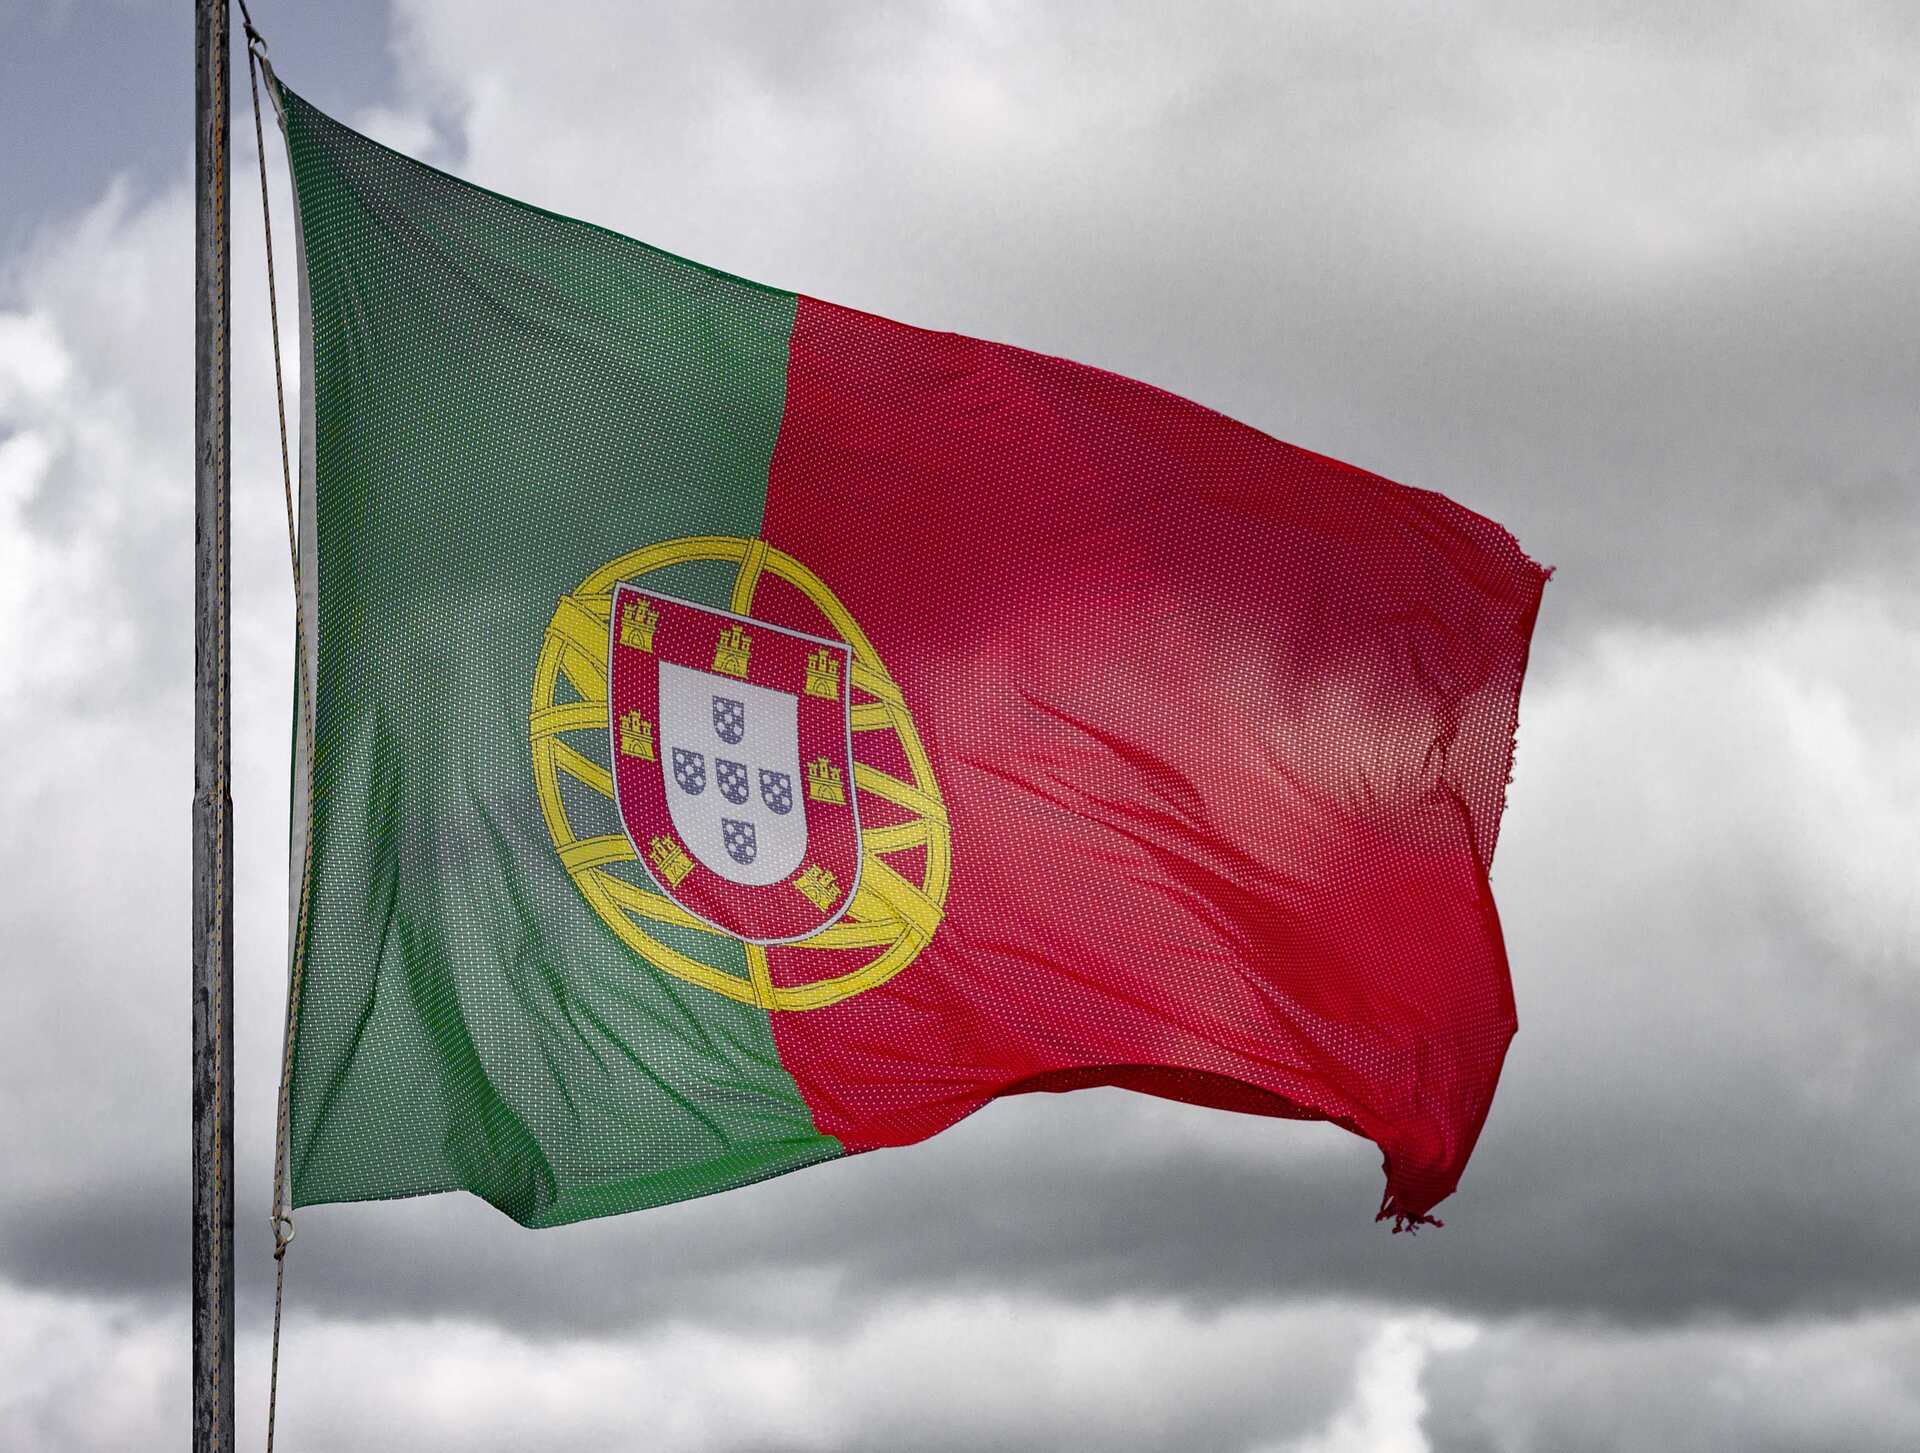 Red and green Portuguese flag